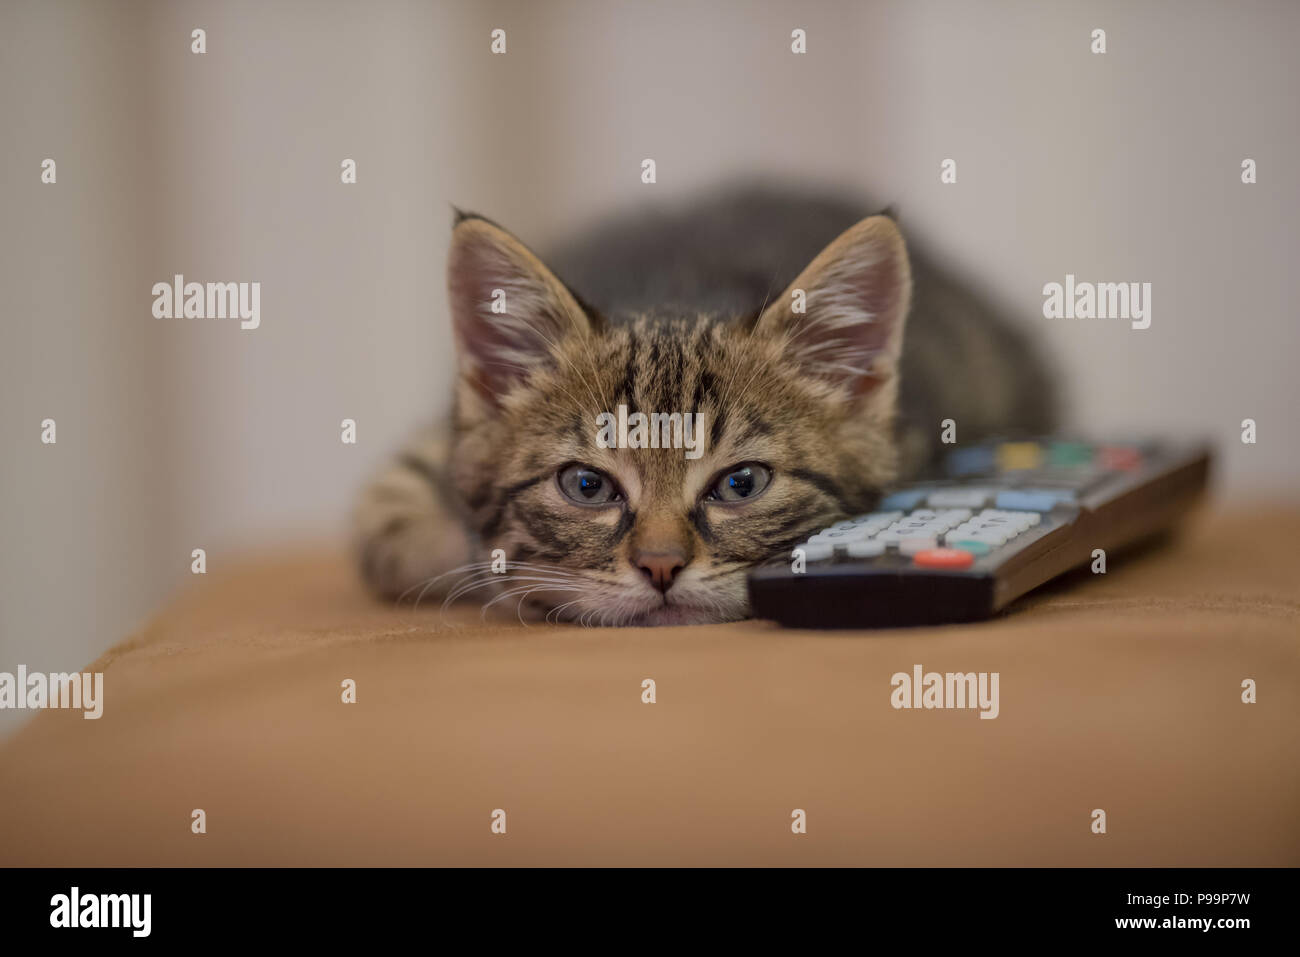 Cute kitten with remote control looking bored and tired portrait, cutest cat photo, cutest kitten photo bored, tired, sleepy Stock Photo